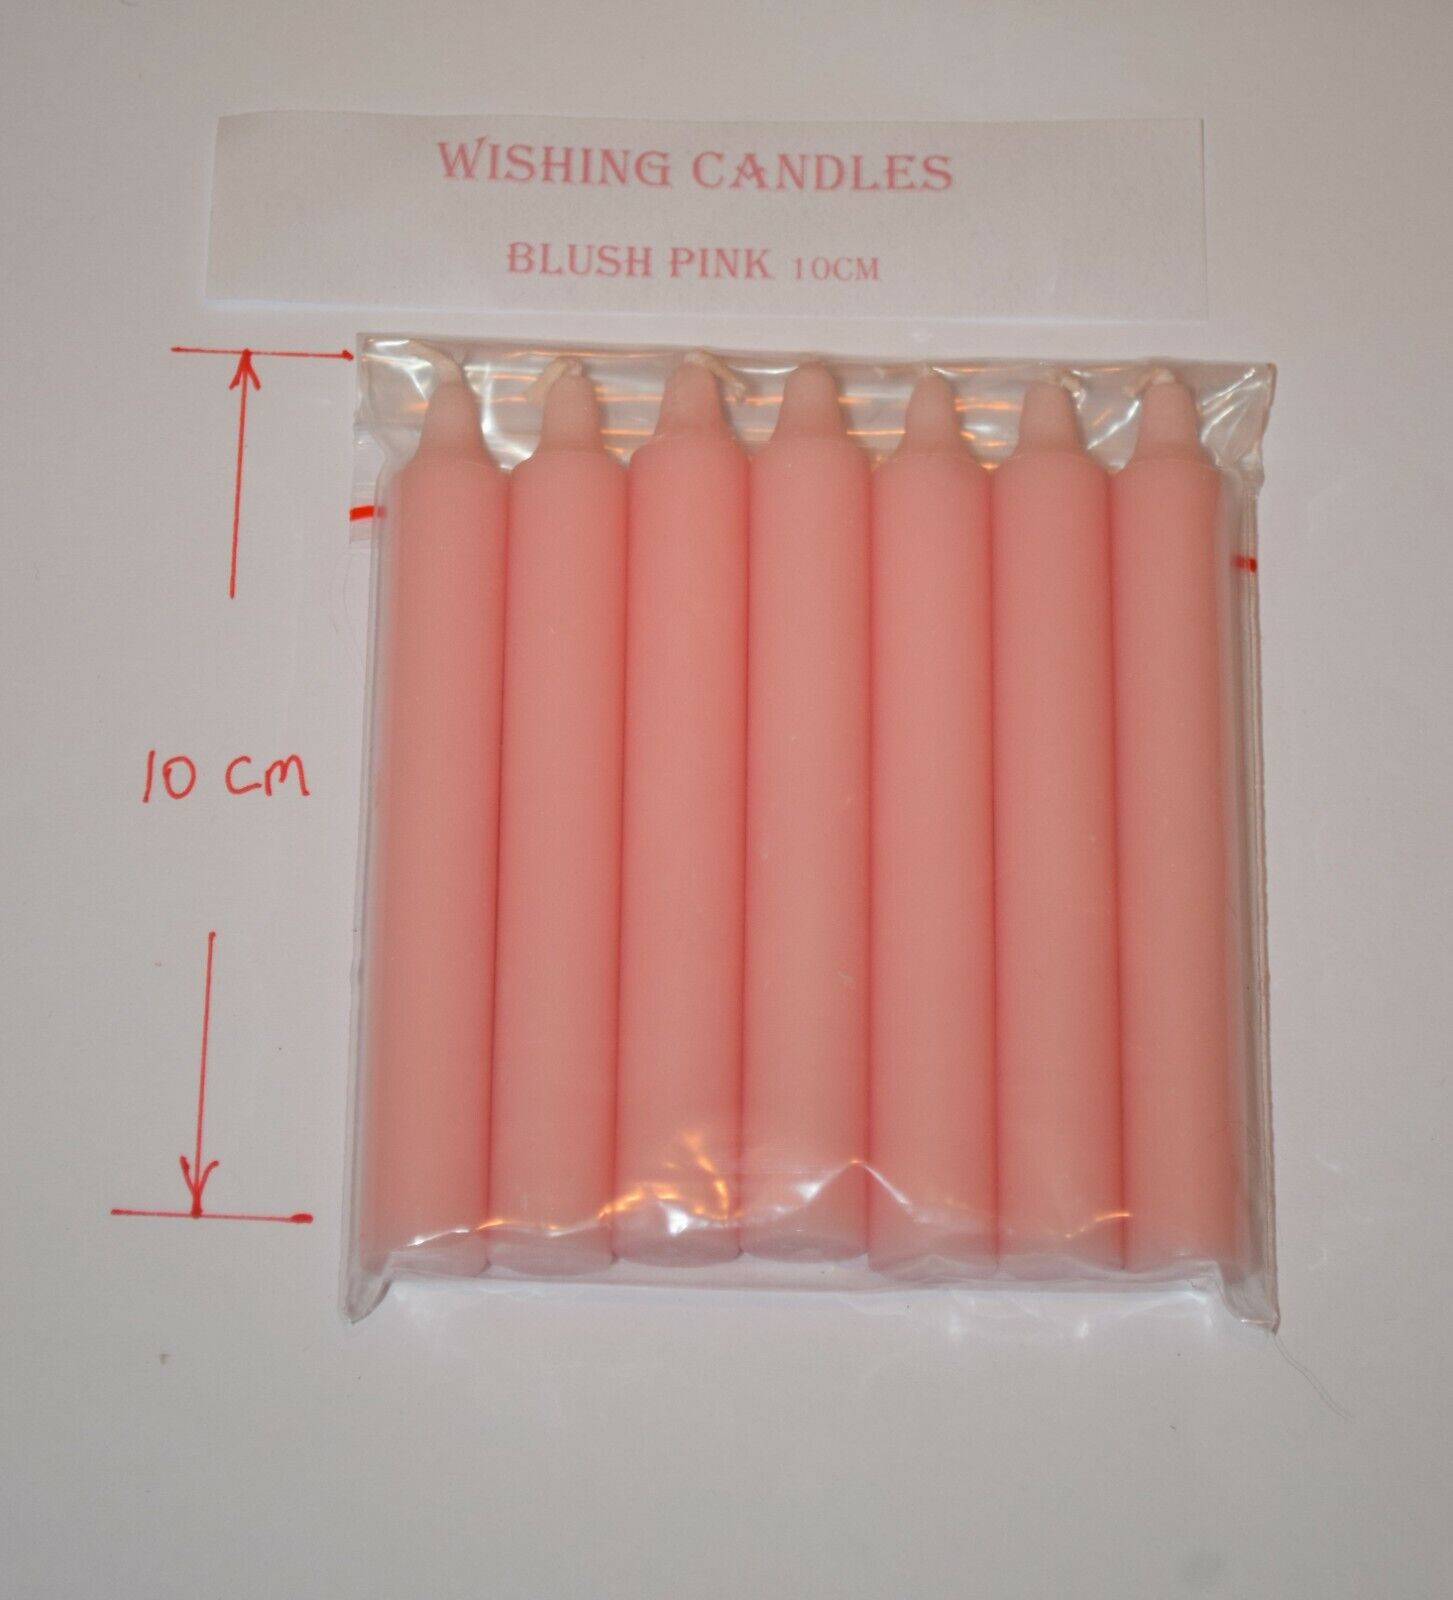 Candles wish chime candle Ritual spiritual spell ALL COLORS Bulk discount 10cm BELOW COST